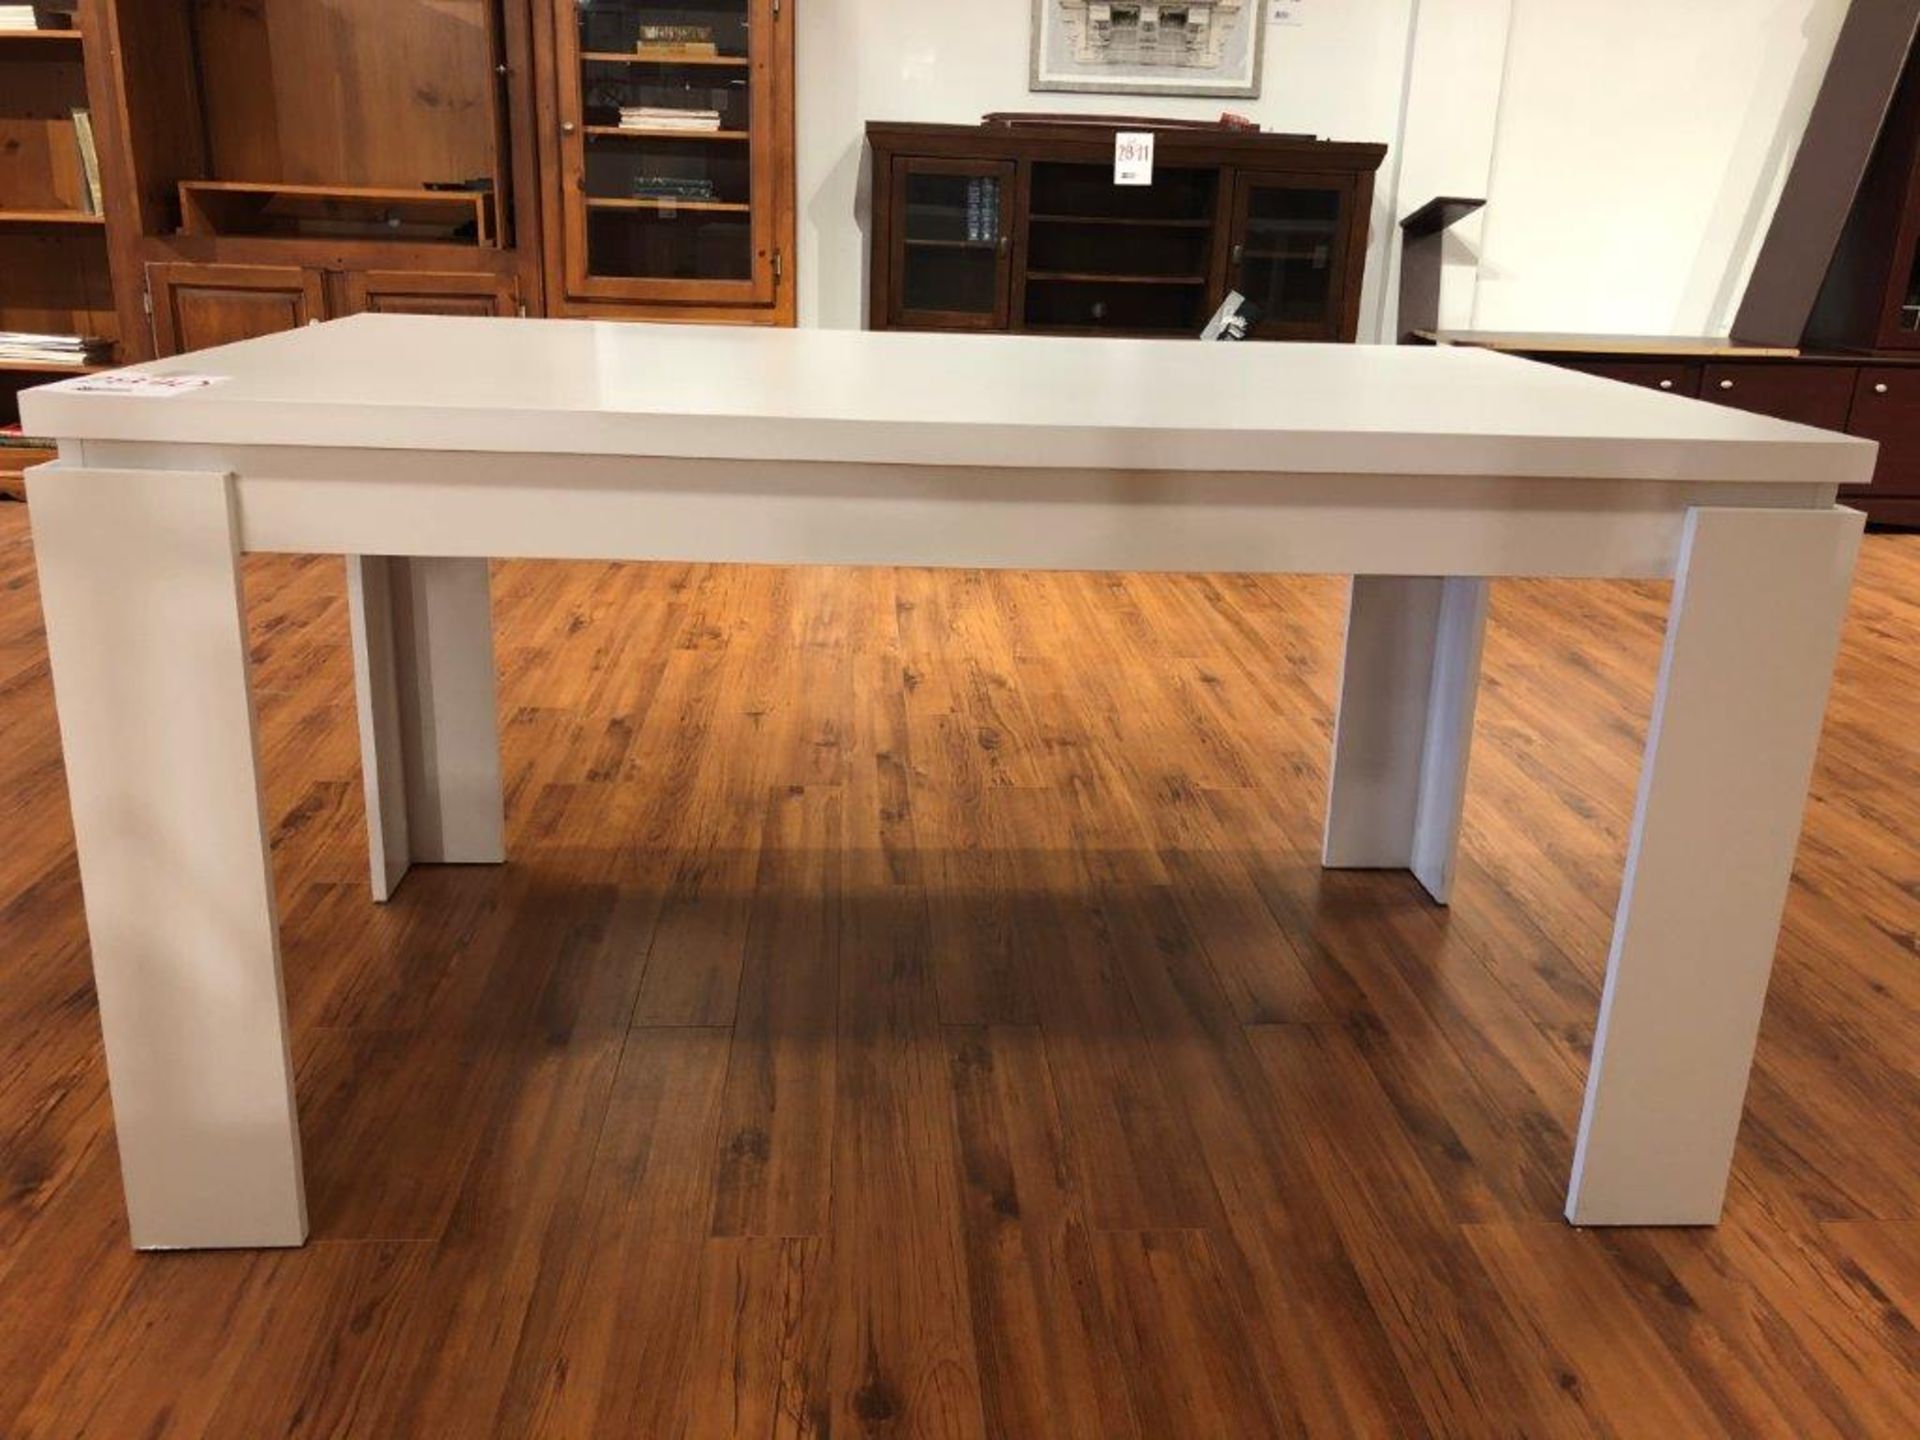 Dining room table 3'x5' white